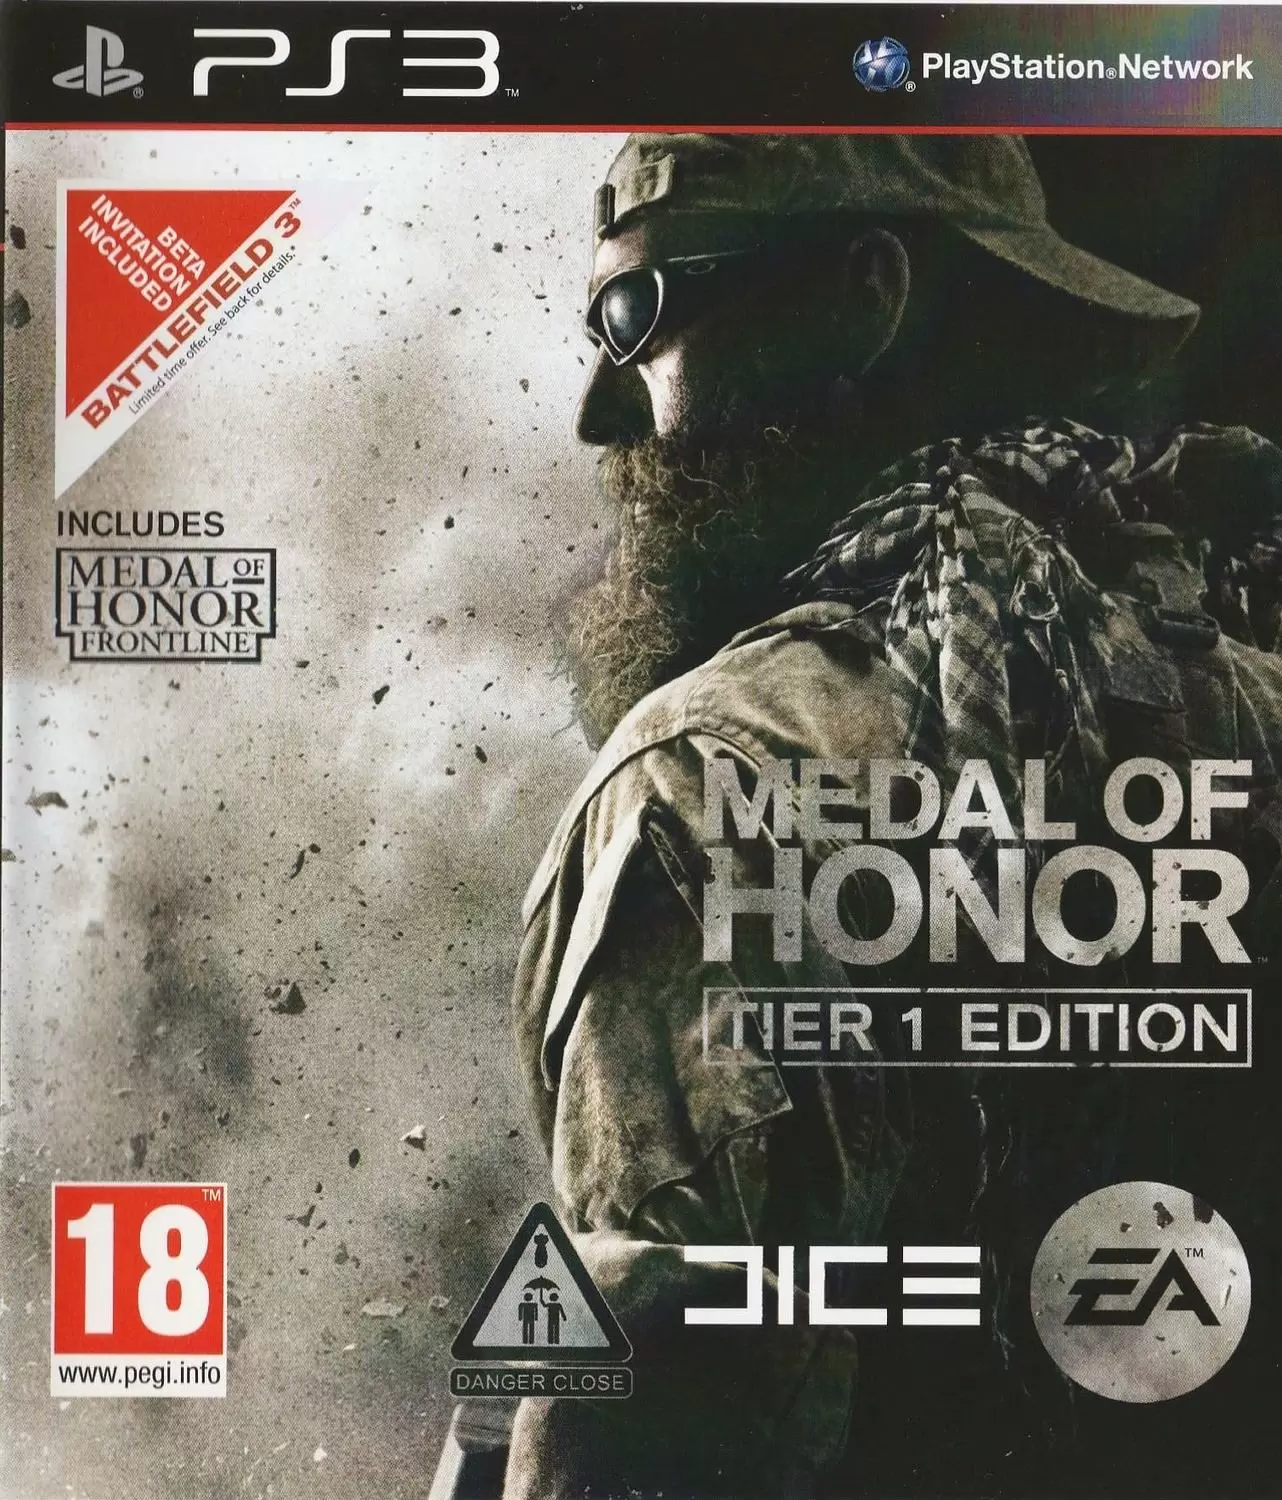 Medal of honor 3. Medal of Honor Limited Edition ps3. Игра Medal of Honor на PLAYSTATION 3. Медаль оф хонор на пс3. Medal of Honor ps3 обложка.